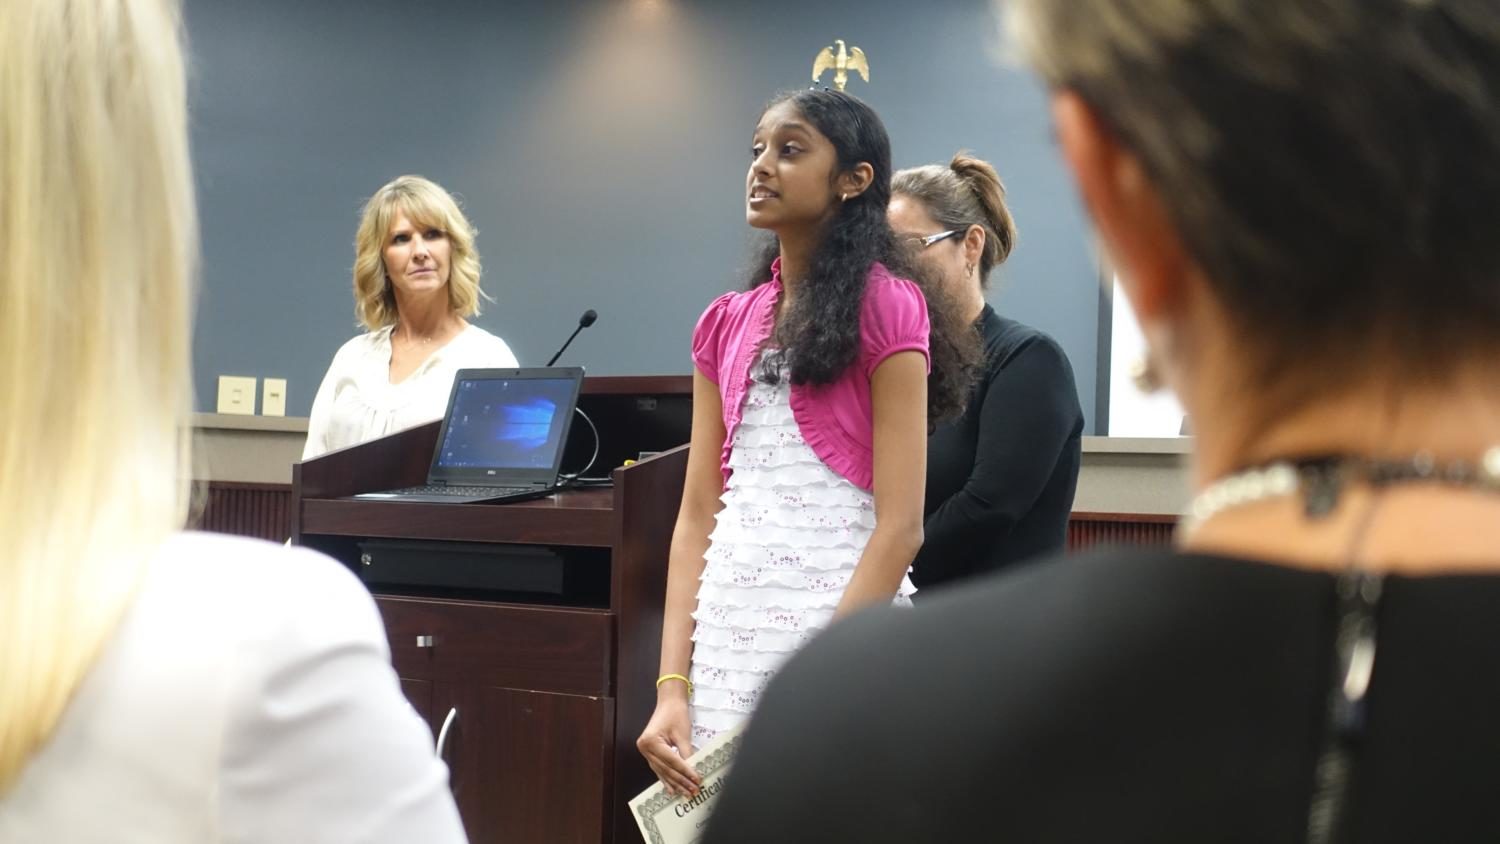 Coppell High School  junior Bhoomika Kumar was recognized for being awarded the Emperor Science Award earlier this year. The Emperor Science Award is sponsored by Stand-up to Cancer and PBS learning community. 